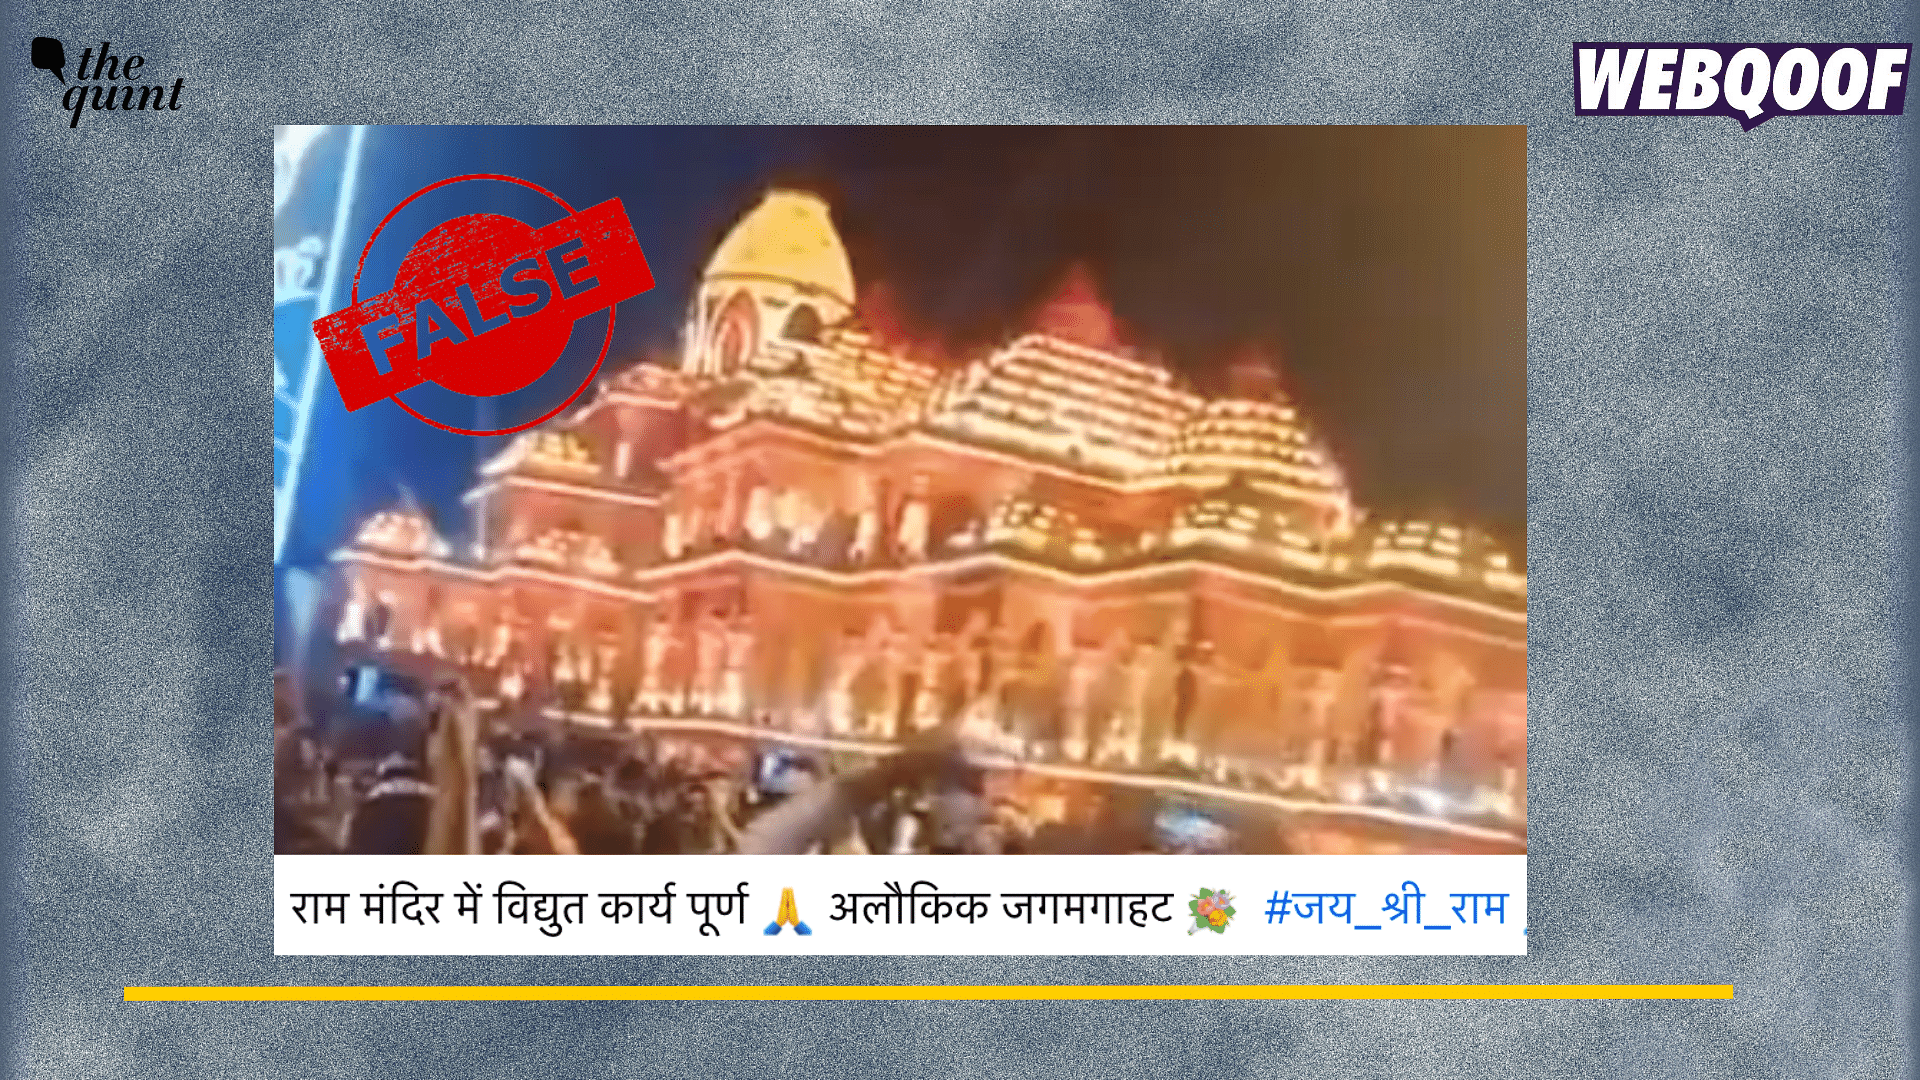 <div class="paragraphs"><p>Fact-Check: This video does not show the Ram temple in Ayodhya, it is a Durga puja pandal from Kolkata.&nbsp;</p></div>